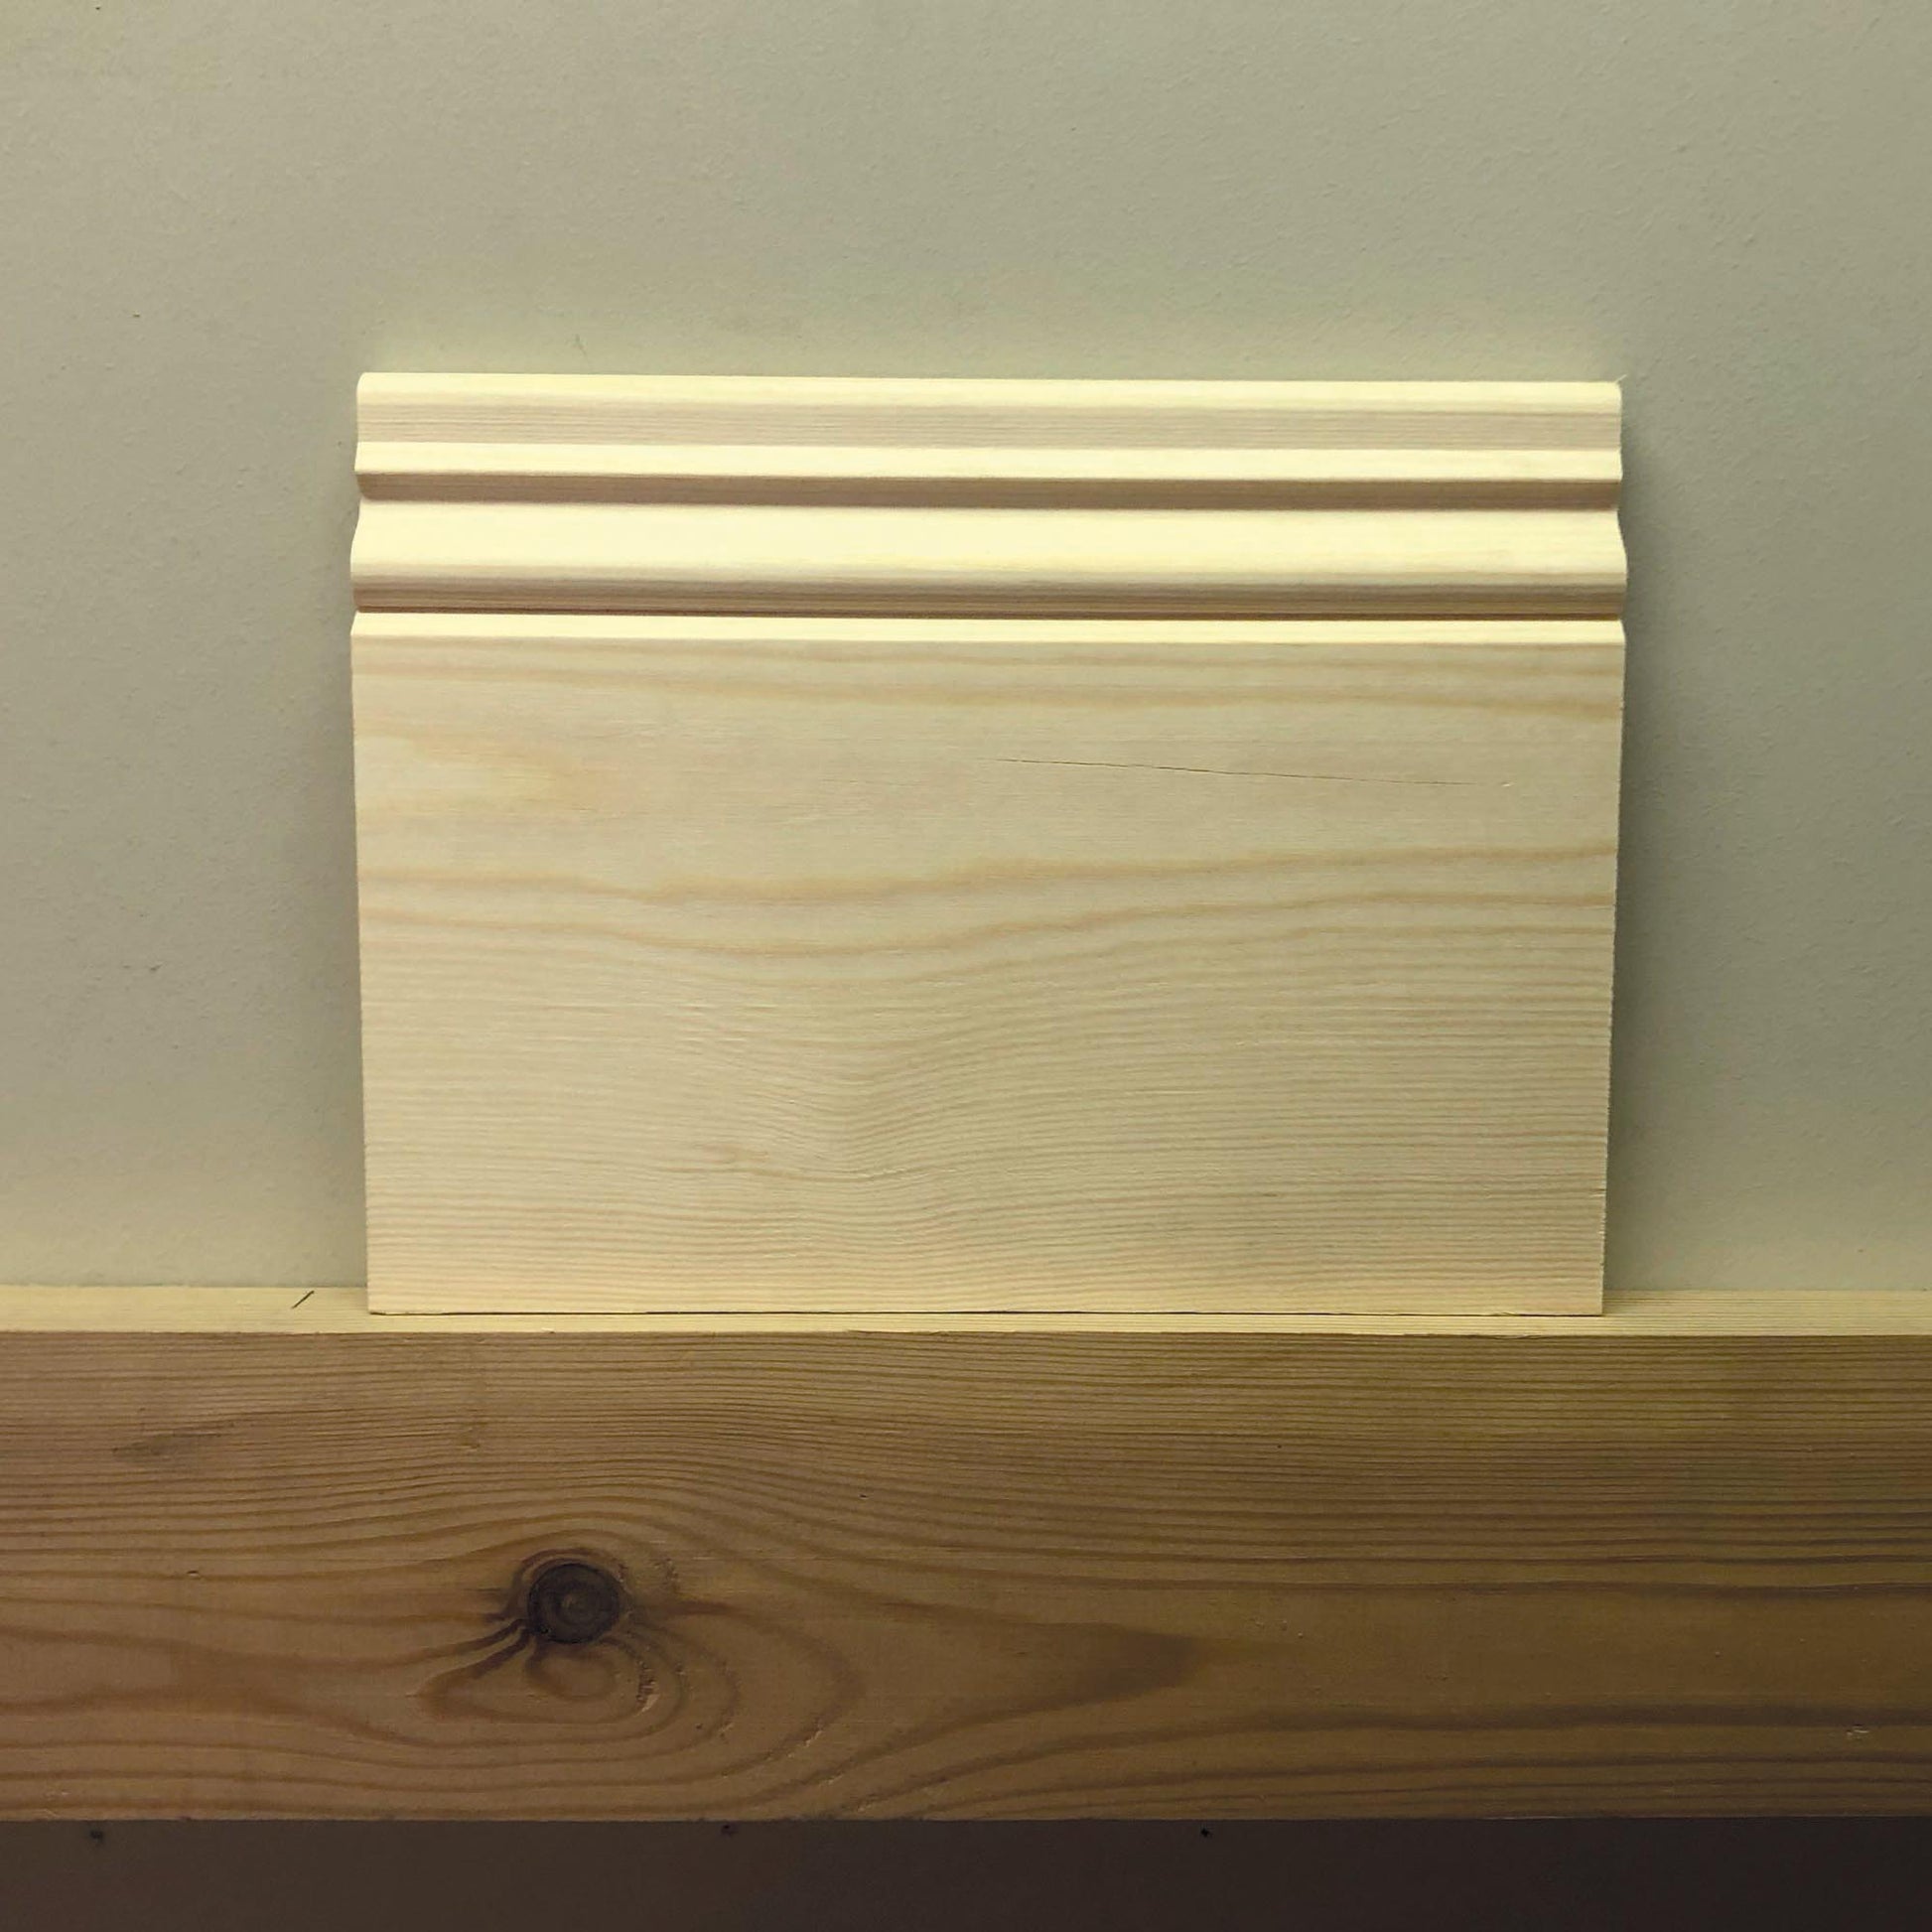 aspect of Antique Victorian Skirting Board section168mm x 21mm 